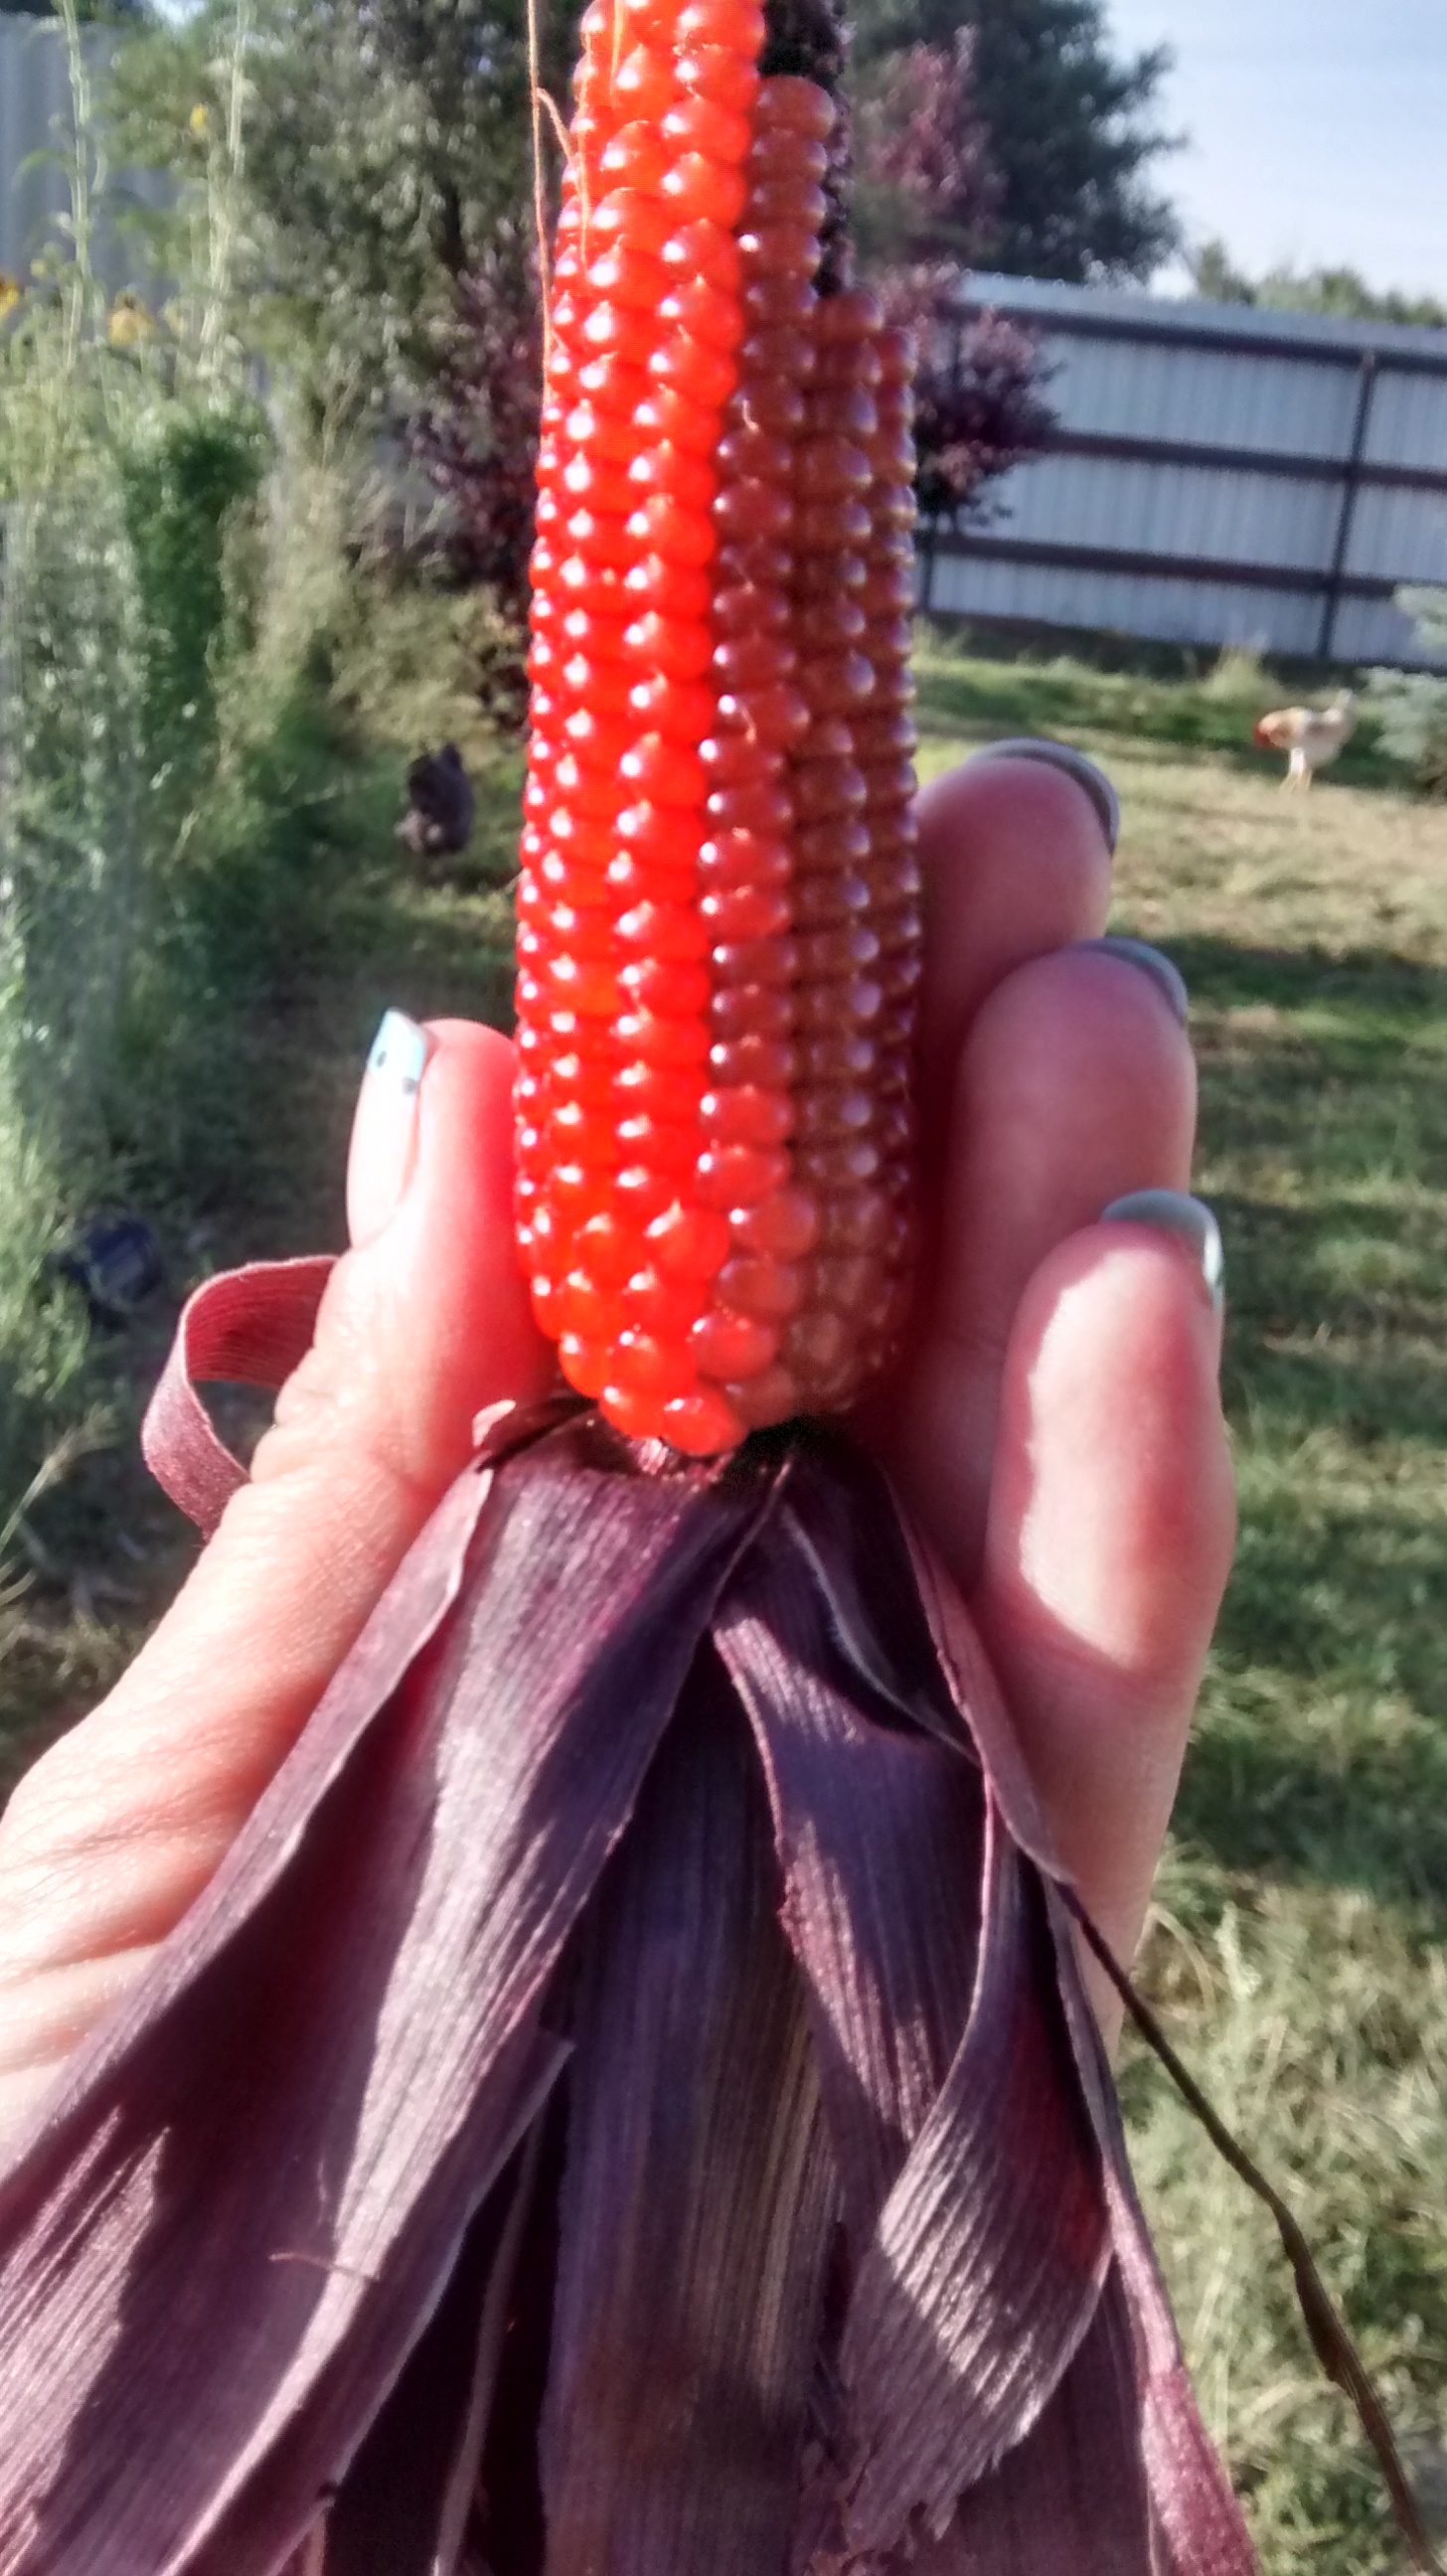 Exquisite coloring popped out of a cross between gem Indian corn and blue maize :)